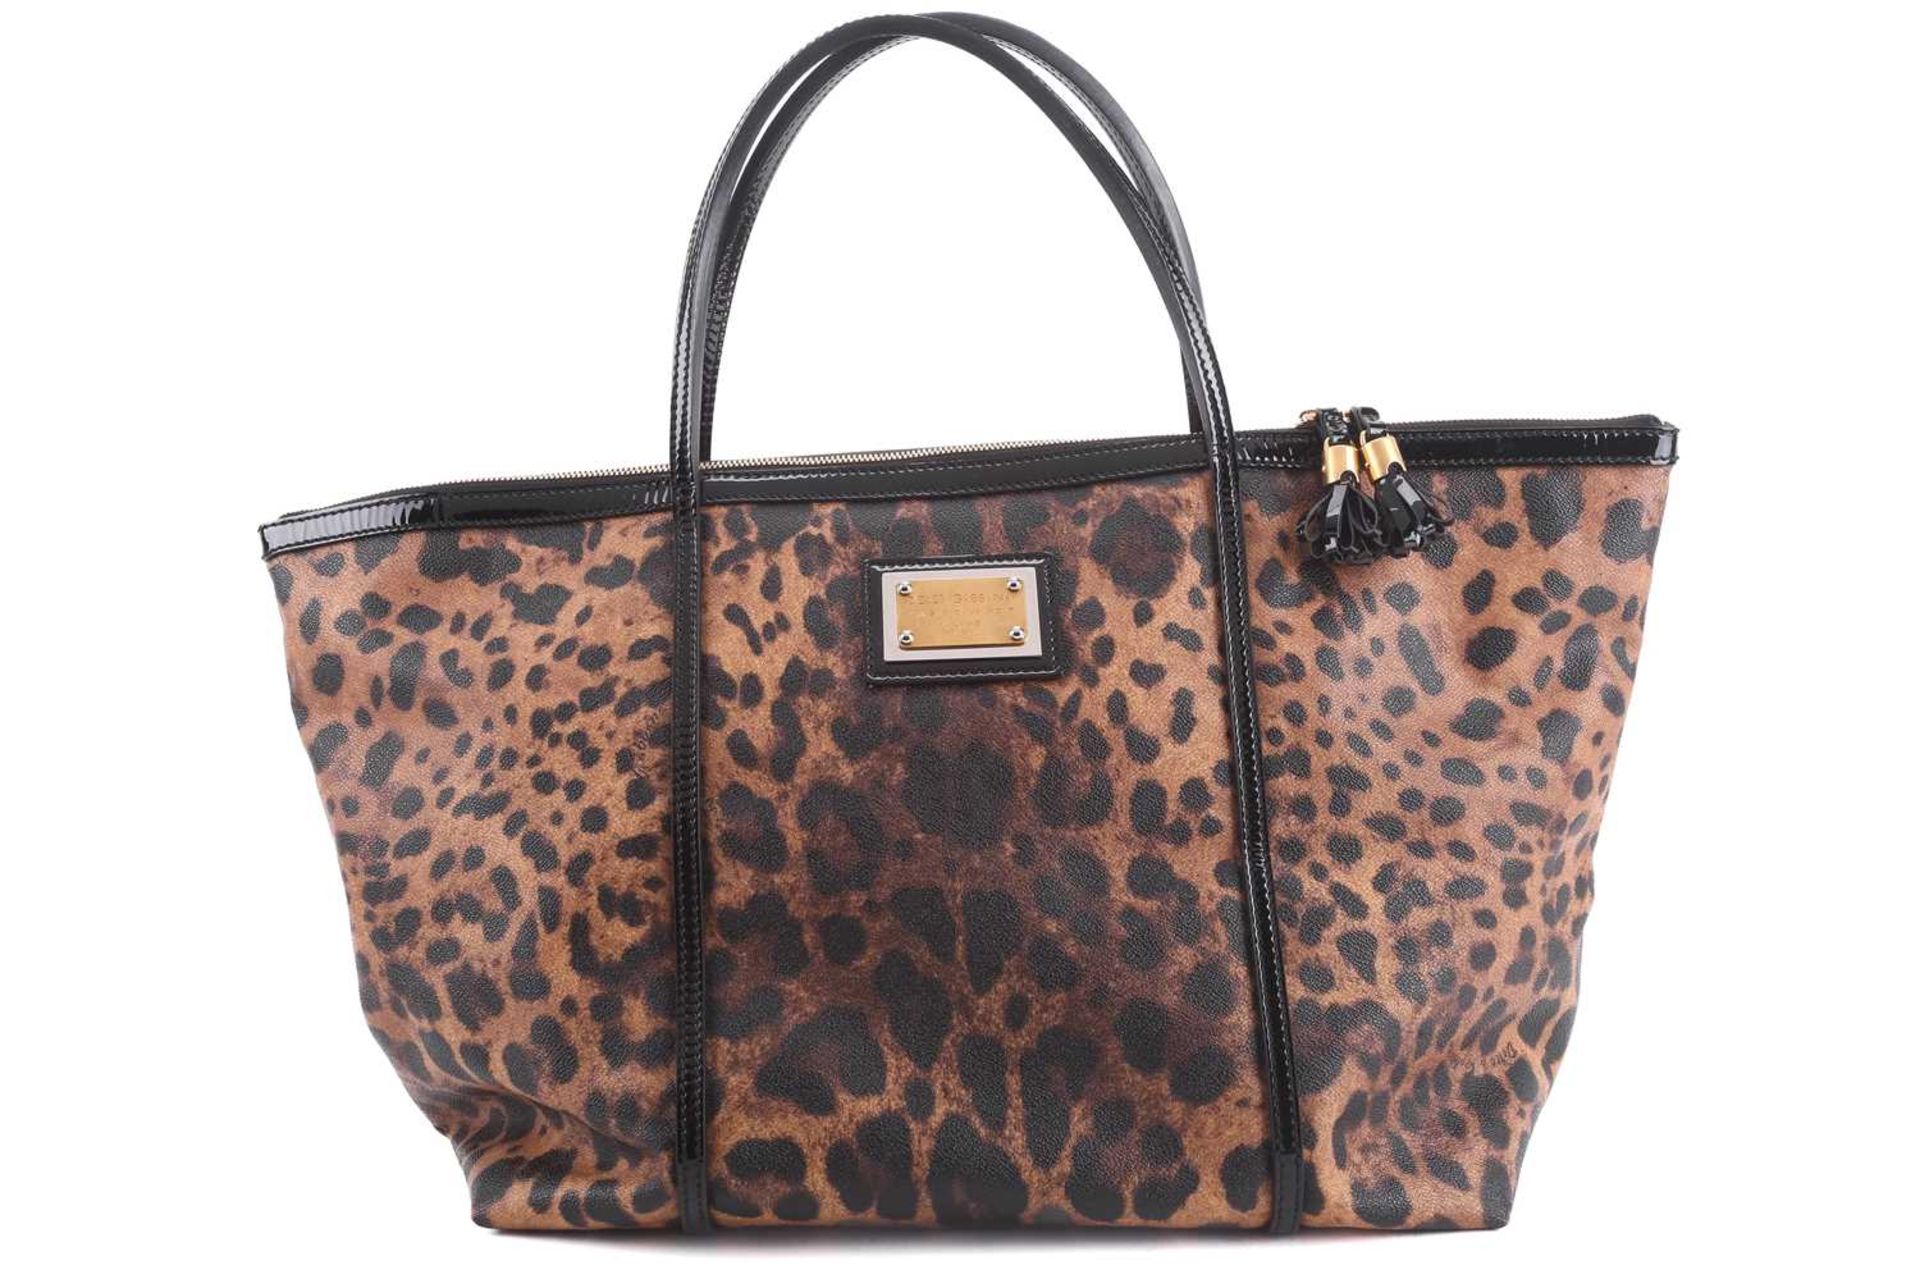 Dolce & Gabbana - a large leopard print 'Escape' shopper tote with black patent leather trims and